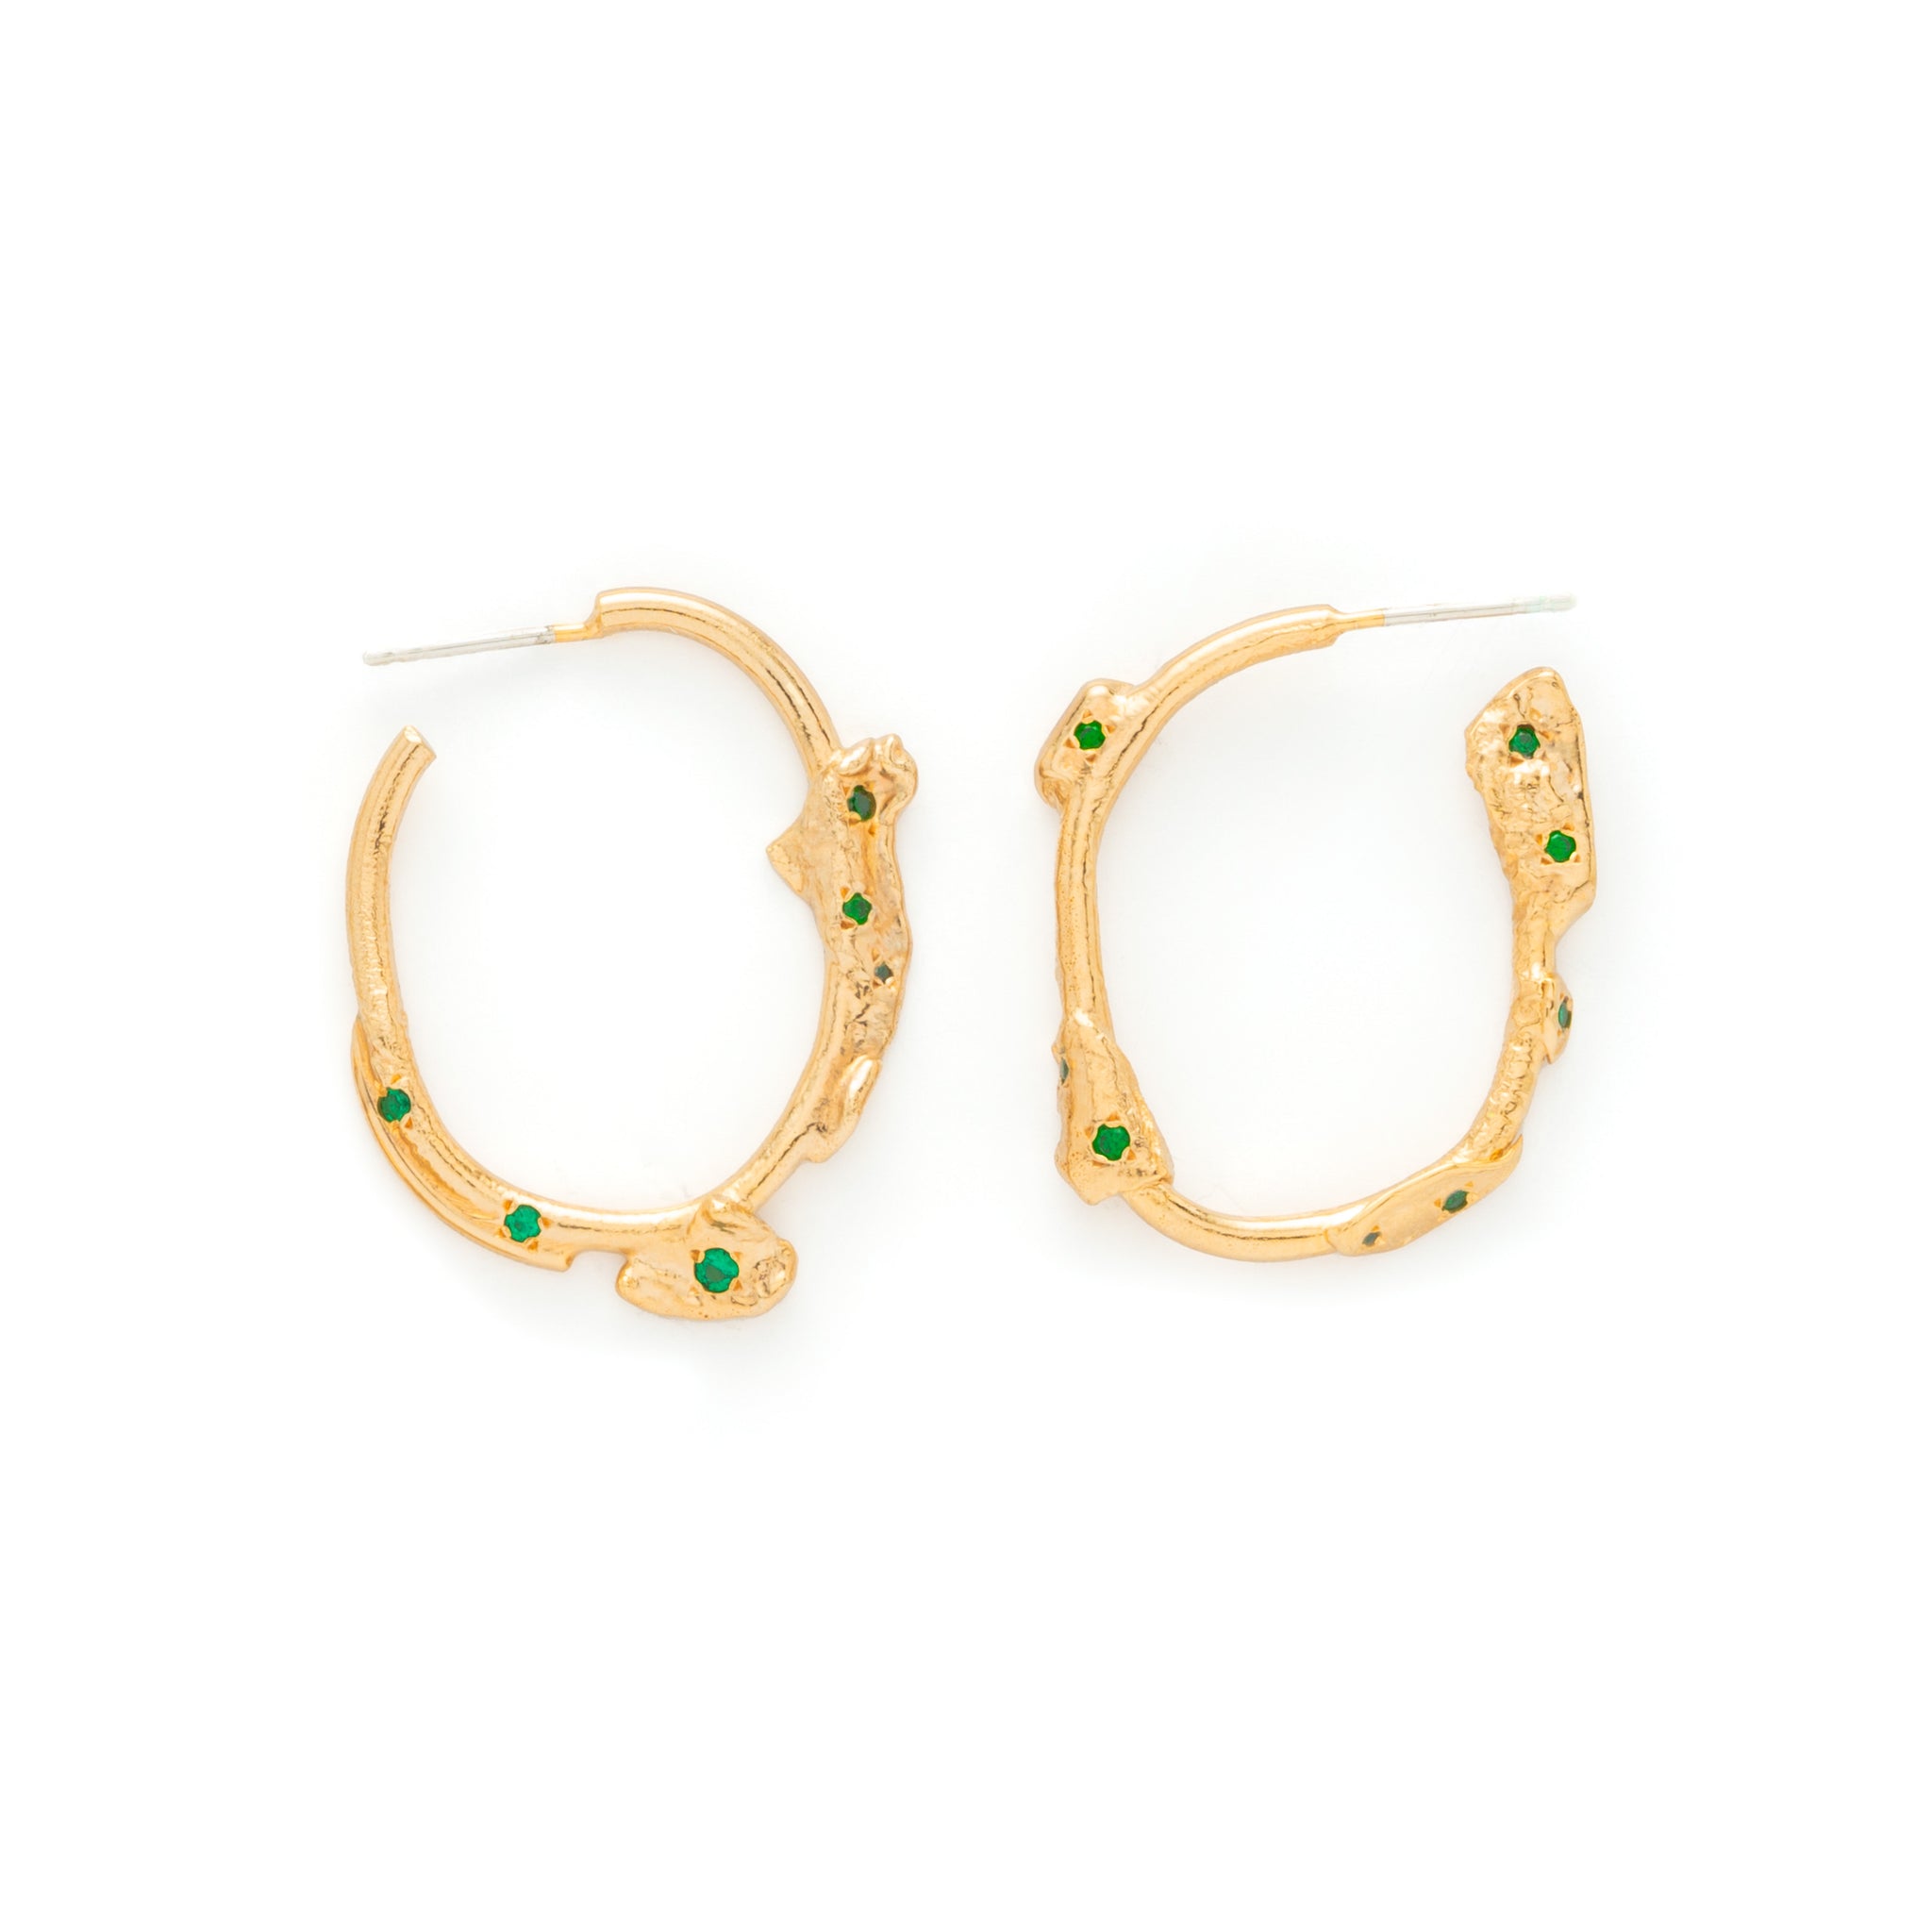 Taormina Piccola Earrings by What If You Stayed